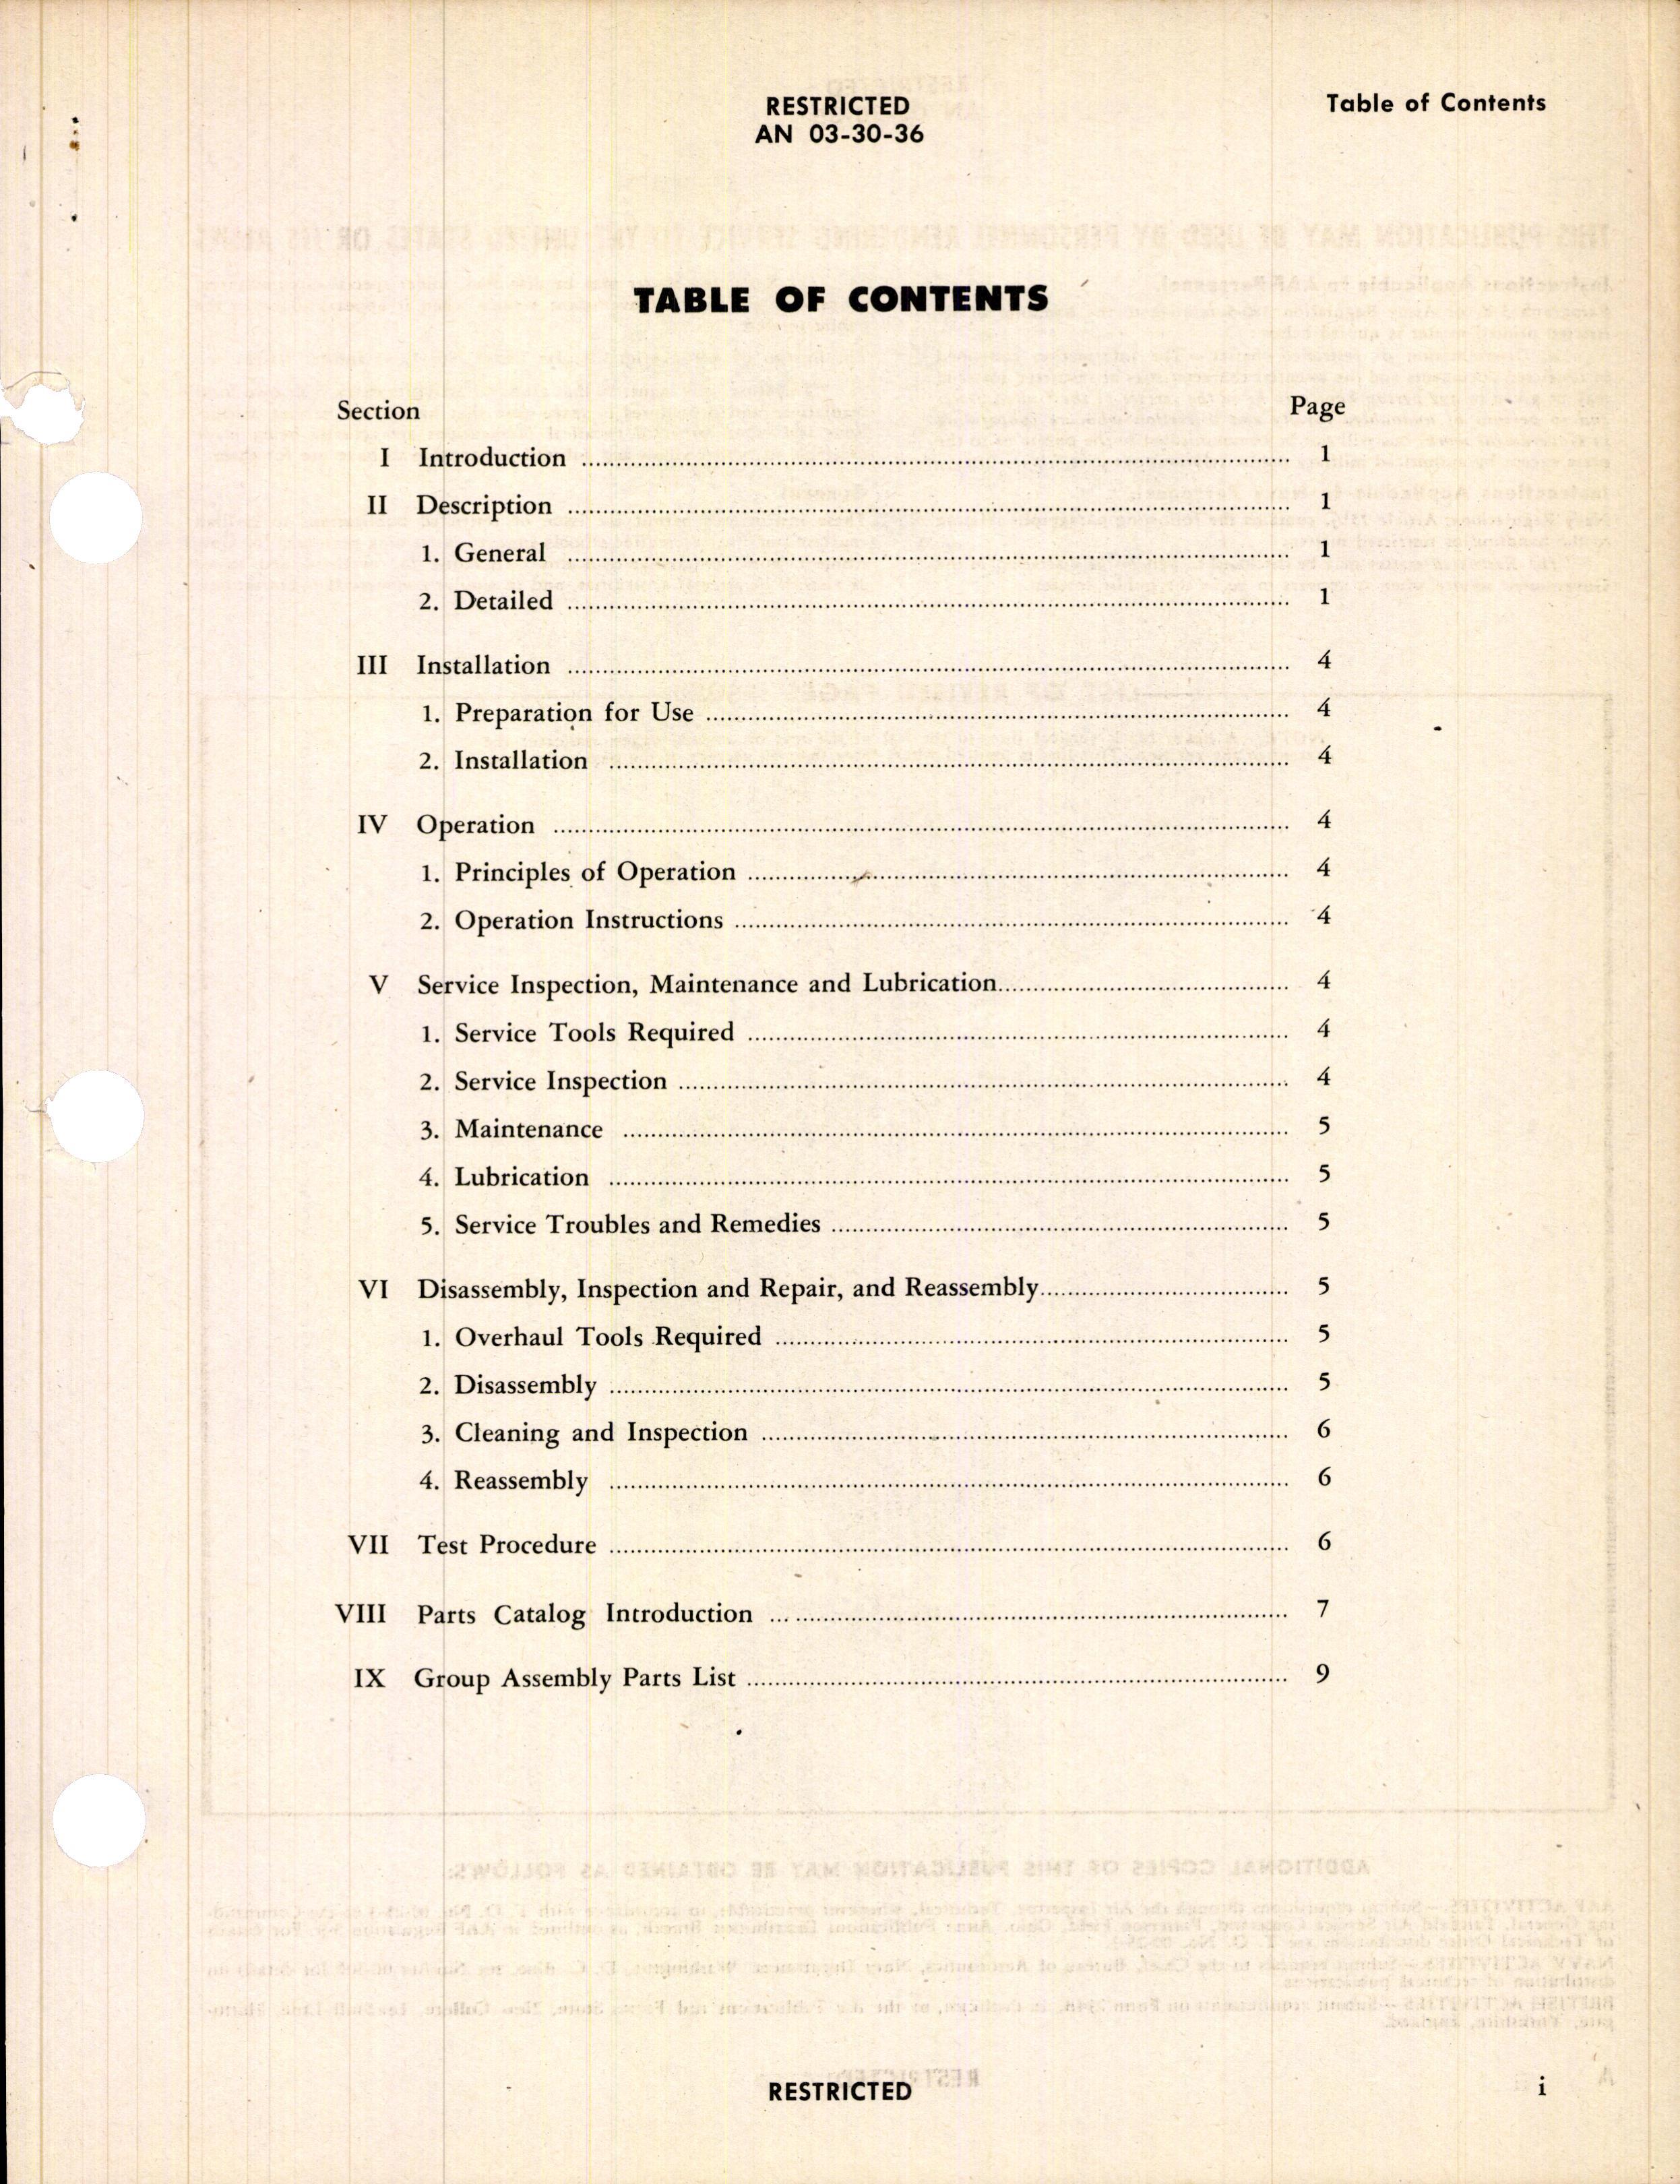 Sample page 3 from AirCorps Library document: Handbook of Instructions with Parts Catalog for Hydraulic Pressure Accumulators